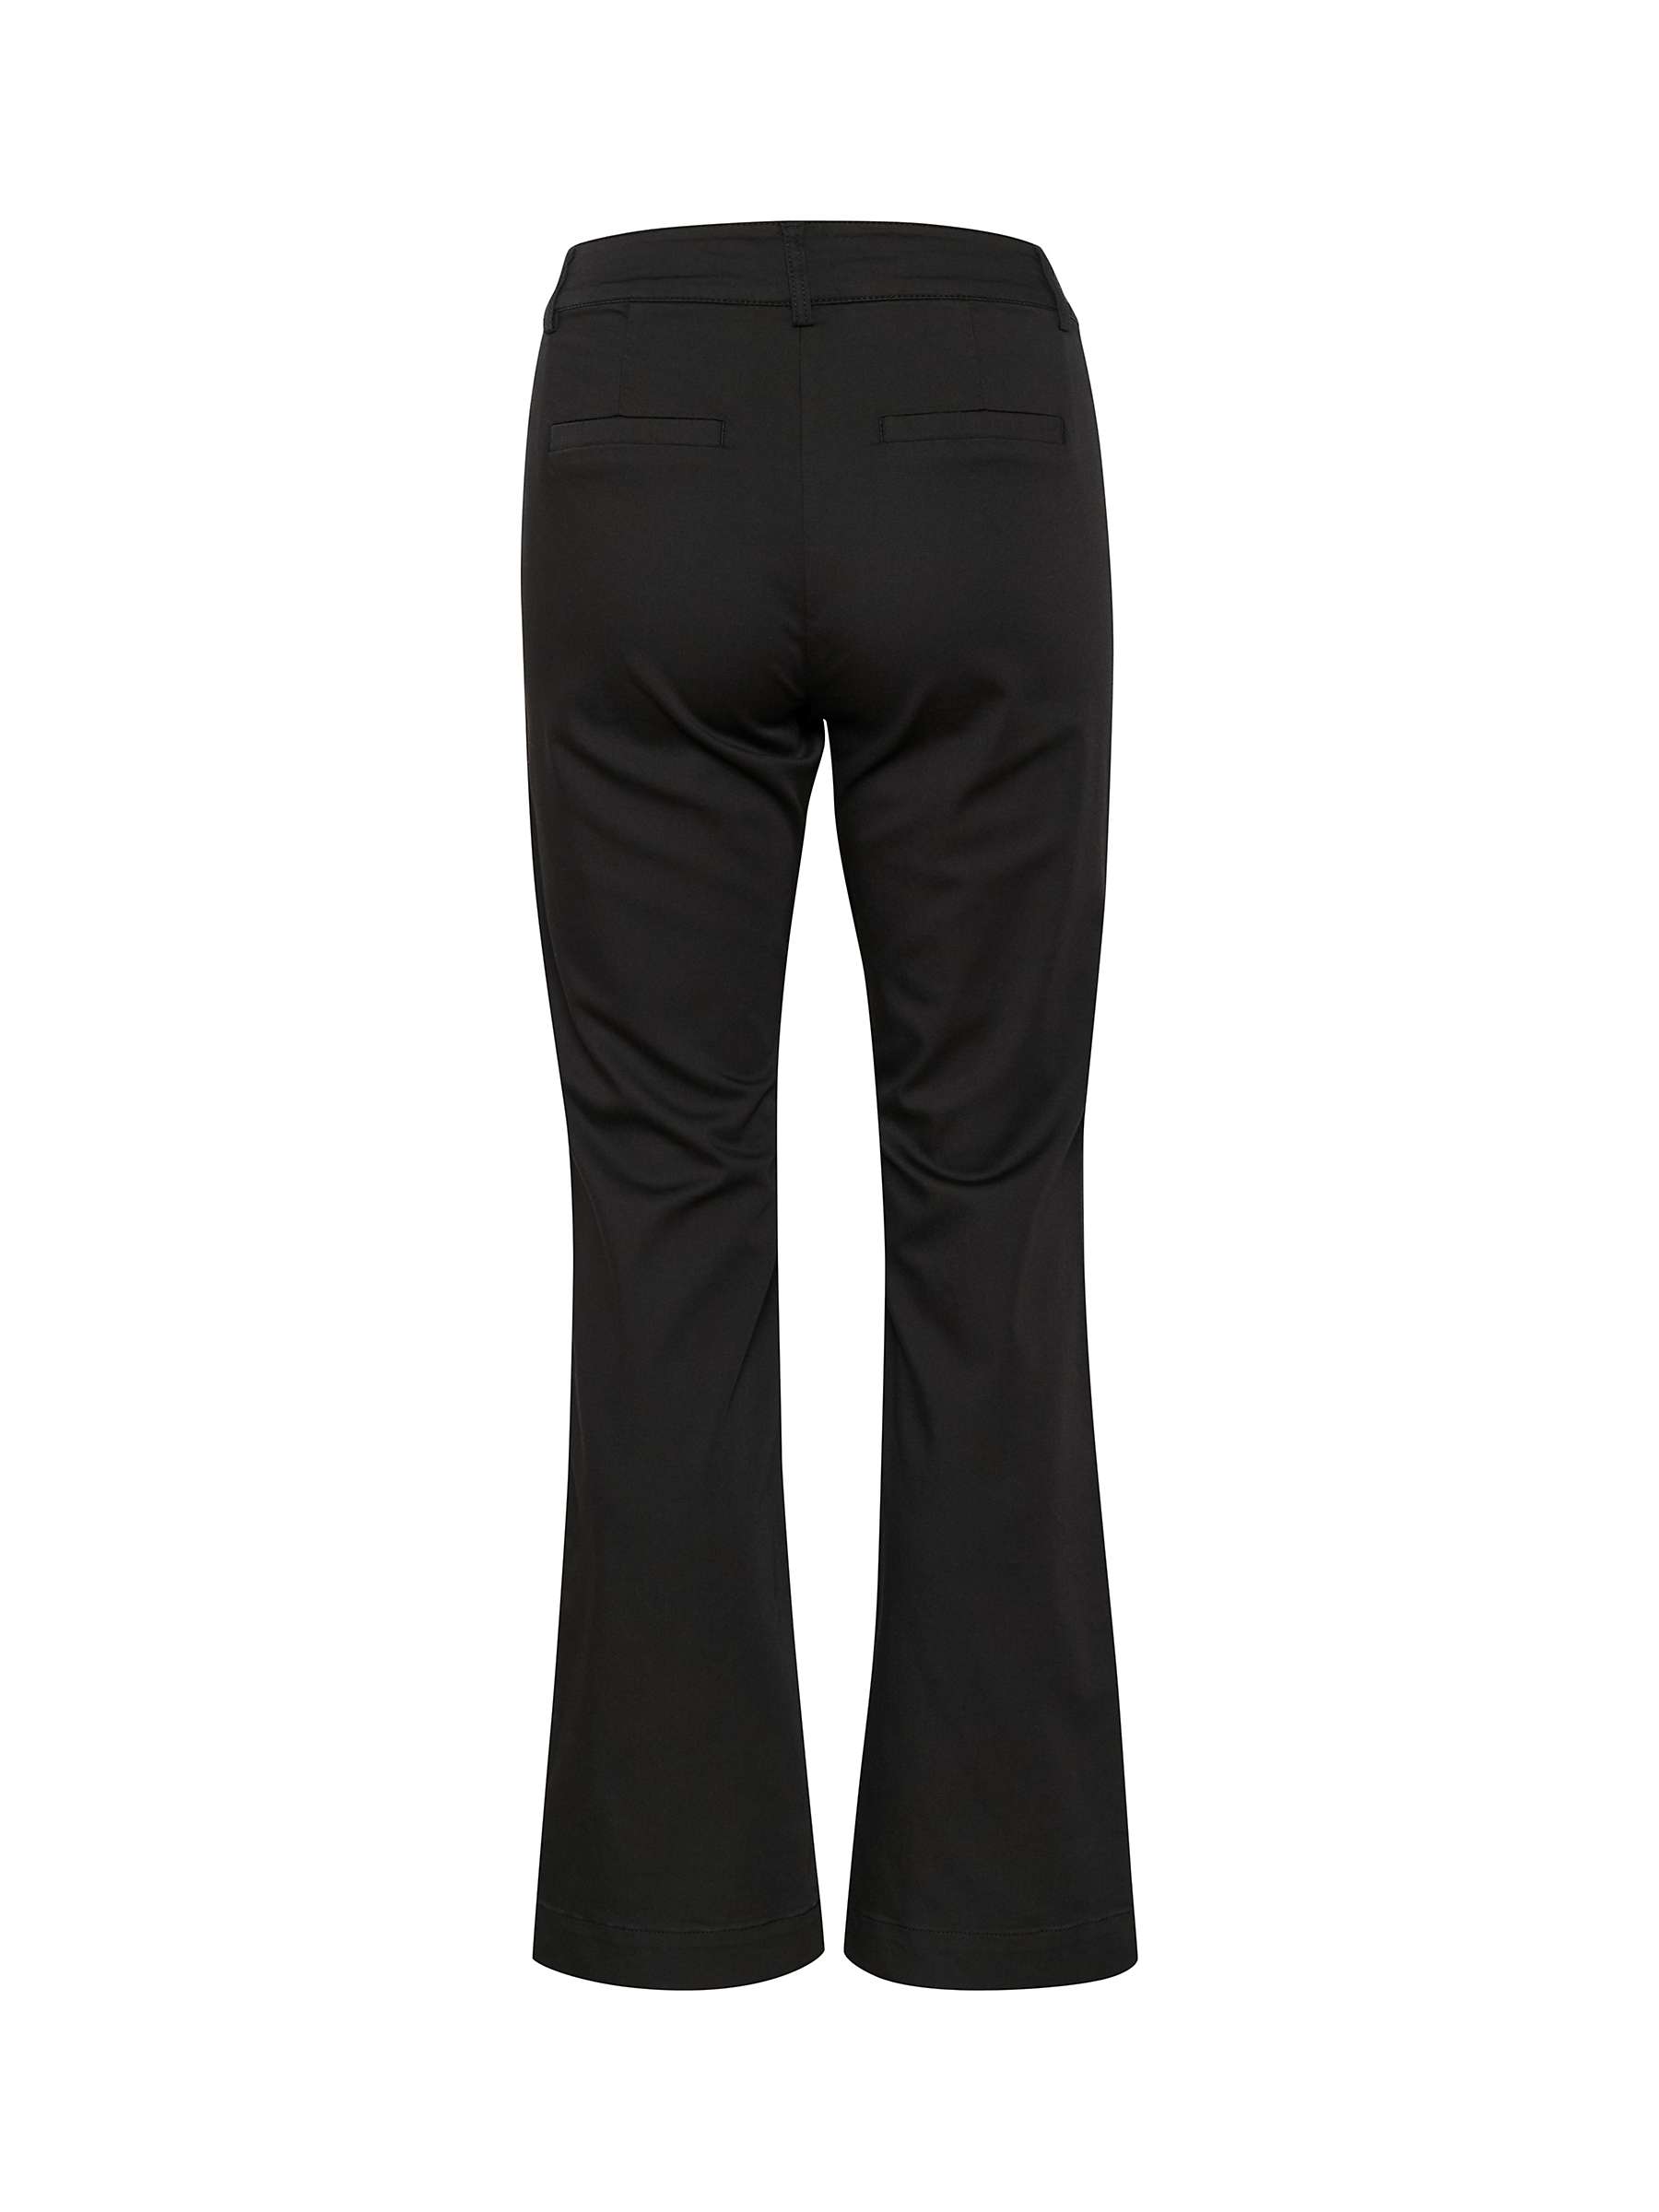 Buy KAFFE Lea Flared Chino Trousers, Deep Black Online at johnlewis.com